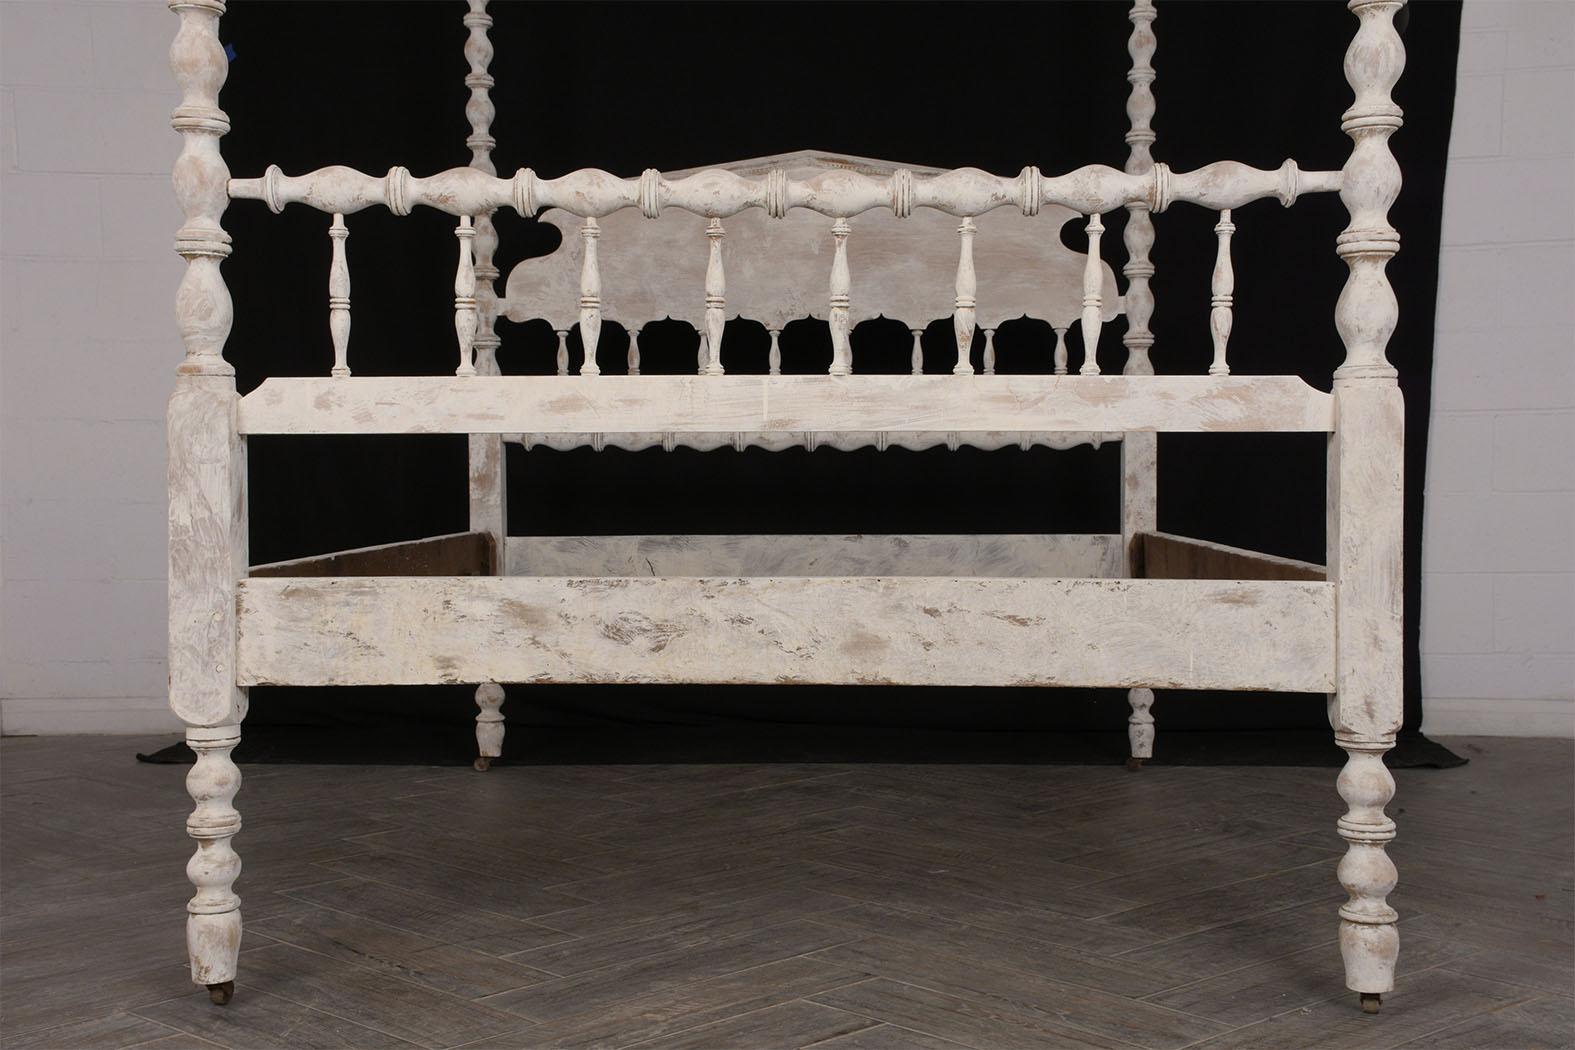 This late 19th century painted English tester bed with distressed finish features four carved posters and designed headboard. The canopy has been reupholstered in an off-white color linen fabric. This bed is sturdy, elegant, and ready to be used in